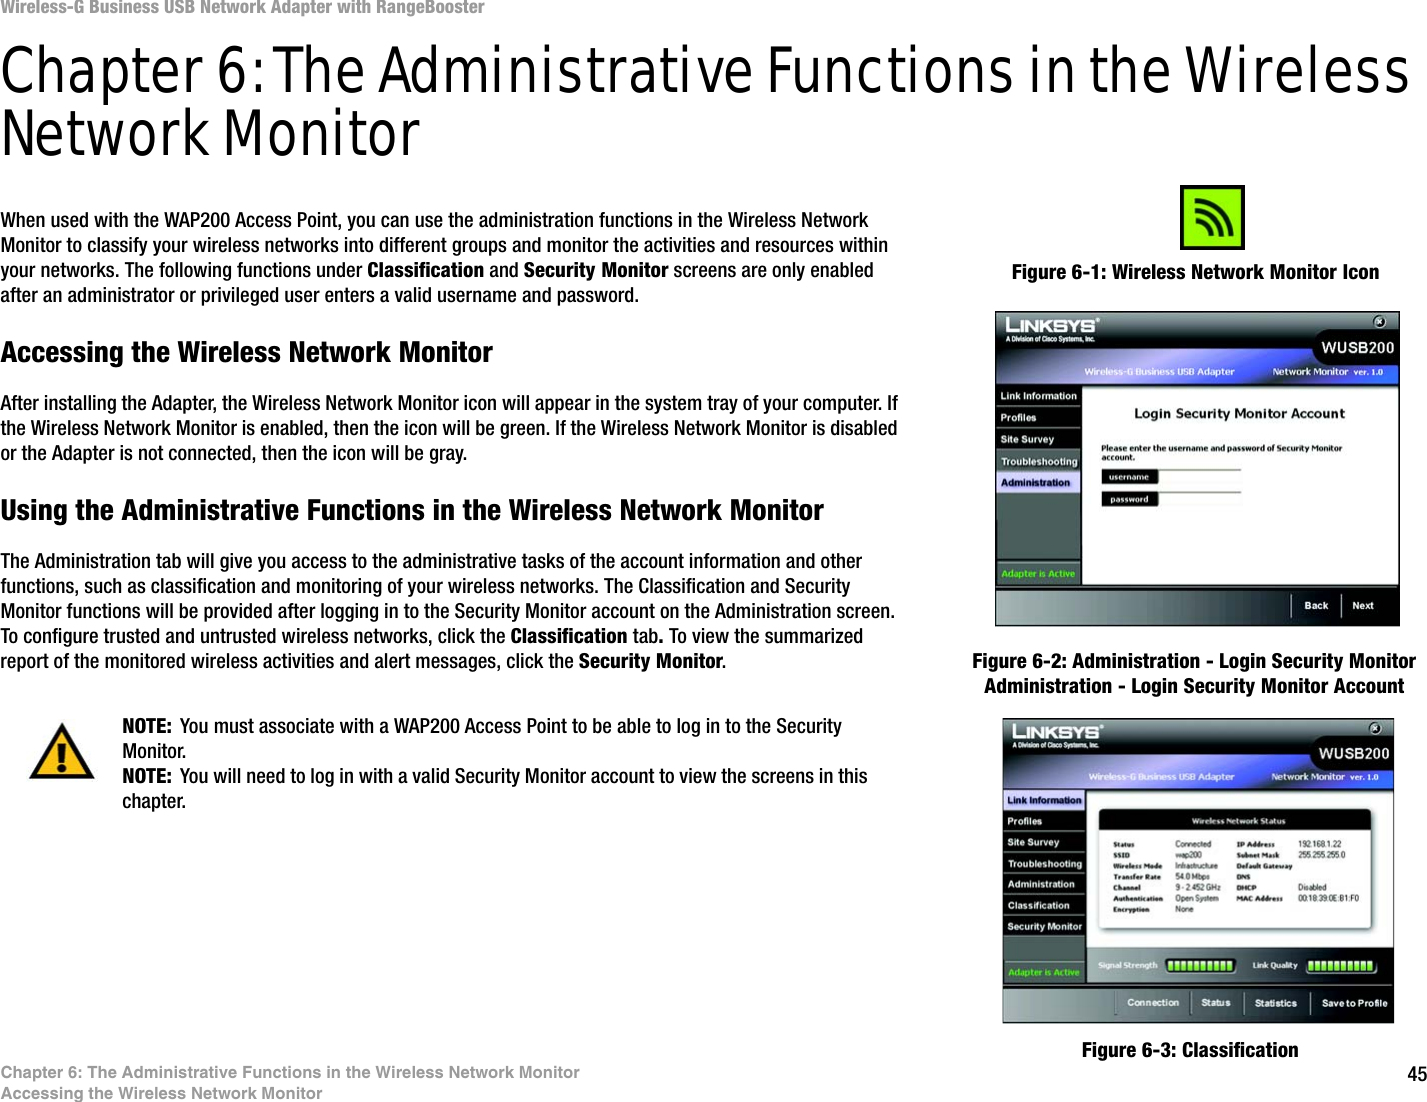 45Chapter 6: The Administrative Functions in the Wireless Network MonitorAccessing the Wireless Network MonitorWireless-G Business USB Network Adapter with RangeBoosterChapter 6: The Administrative Functions in the Wireless Network MonitorWhen used with the WAP200 Access Point, you can use the administration functions in the Wireless Network Monitor to classify your wireless networks into different groups and monitor the activities and resources within your networks. The following functions under Classification and Security Monitor screens are only enabled after an administrator or privileged user enters a valid username and password.Accessing the Wireless Network MonitorAfter installing the Adapter, the Wireless Network Monitor icon will appear in the system tray of your computer. If the Wireless Network Monitor is enabled, then the icon will be green. If the Wireless Network Monitor is disabled or the Adapter is not connected, then the icon will be gray.Using the Administrative Functions in the Wireless Network MonitorThe Administration tab will give you access to the administrative tasks of the account information and other functions, such as classification and monitoring of your wireless networks. The Classification and Security Monitor functions will be provided after logging in to the Security Monitor account on the Administration screen. To configure trusted and untrusted wireless networks, click the Classification tab. To view the summarized report of the monitored wireless activities and alert messages, click the Security Monitor. NOTE: You must associate with a WAP200 Access Point to be able to log in to the Security Monitor.NOTE: You will need to log in with a valid Security Monitor account to view the screens in this chapter. Figure 6-1: Wireless Network Monitor IconFigure 6-2: Administration - Login Security Monitor Administration - Login Security Monitor AccountFigure 6-3: Classification